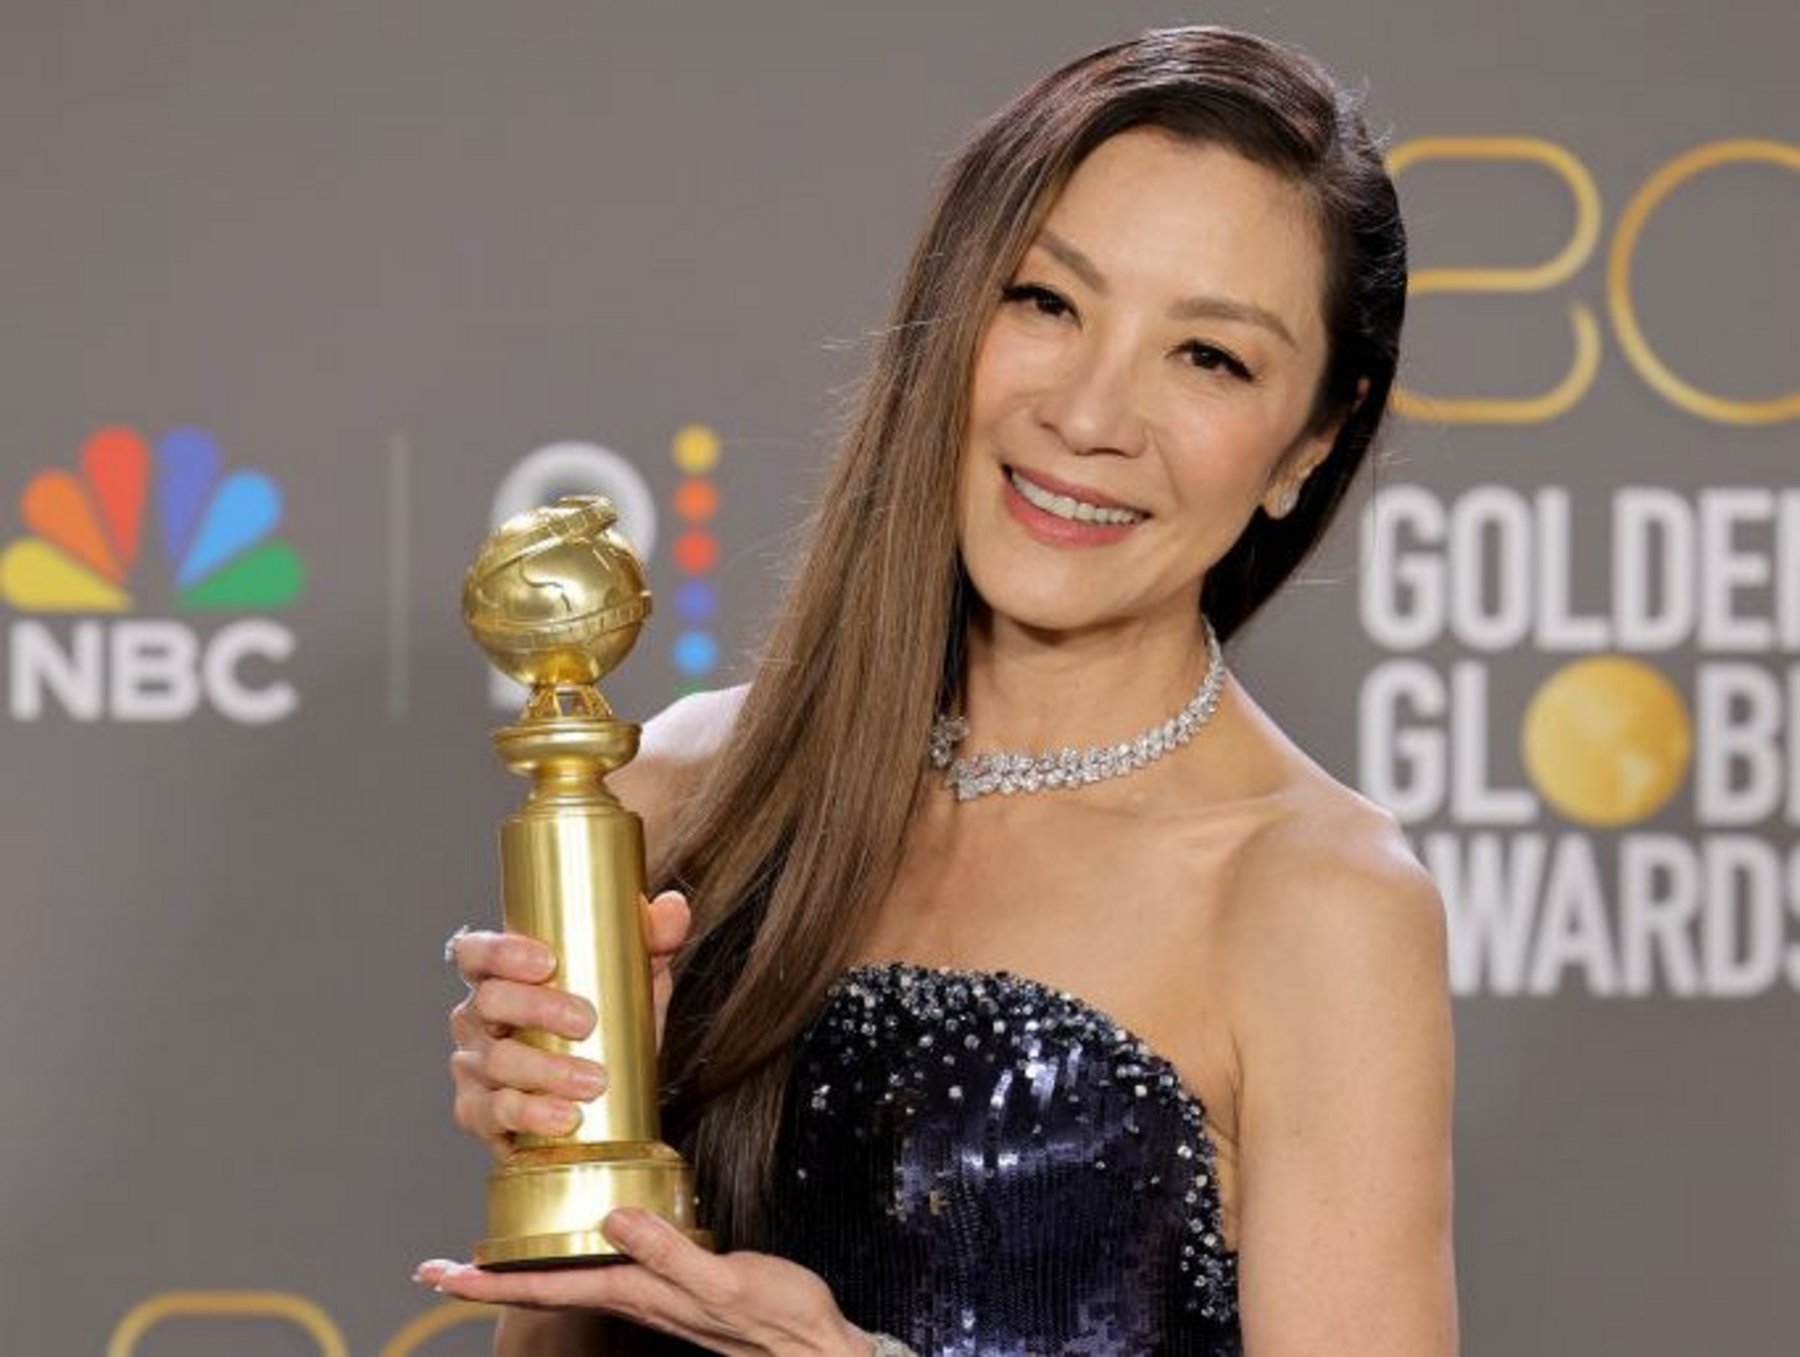 Golden Globes Awards 2023: Michelle Yeoh wins and other highlights